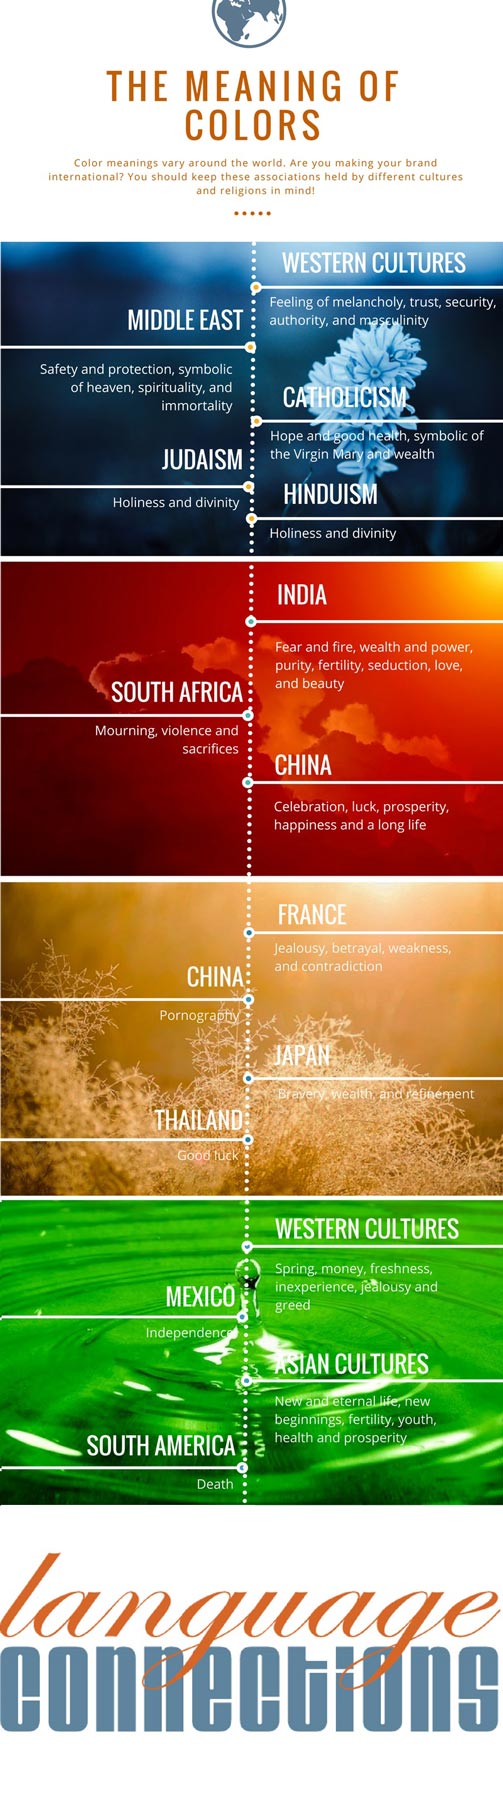 Color Meanings - The Meaning of Color Infographic Language Connections